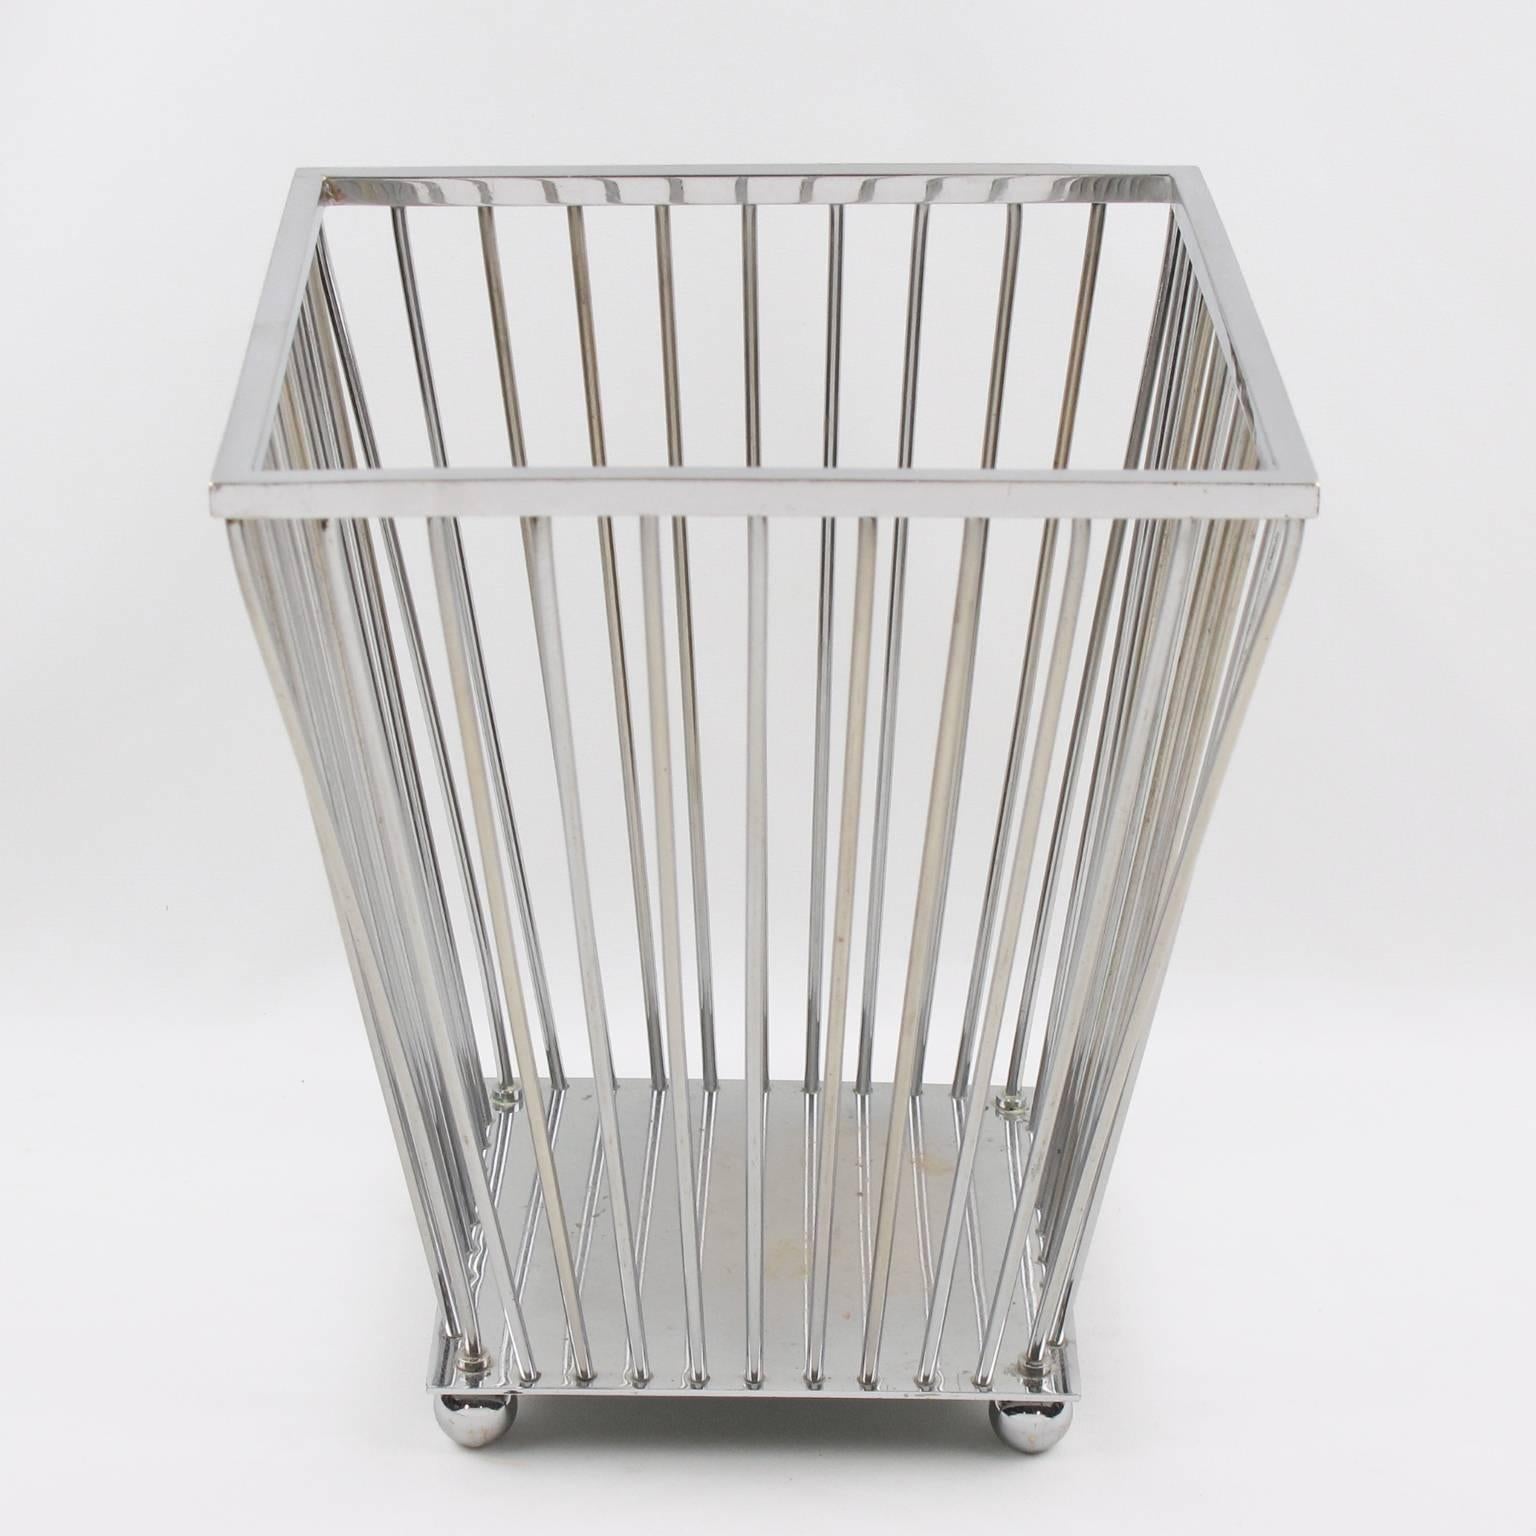 Elegant Art Deco modernist heavy chromed metal desk accessory, office waste basket by French Designer Jacques Adnet (1900 - 1984). Minimalist geometric square shape, typical Art Deco design with slims columns resting on a square base with tiny bead